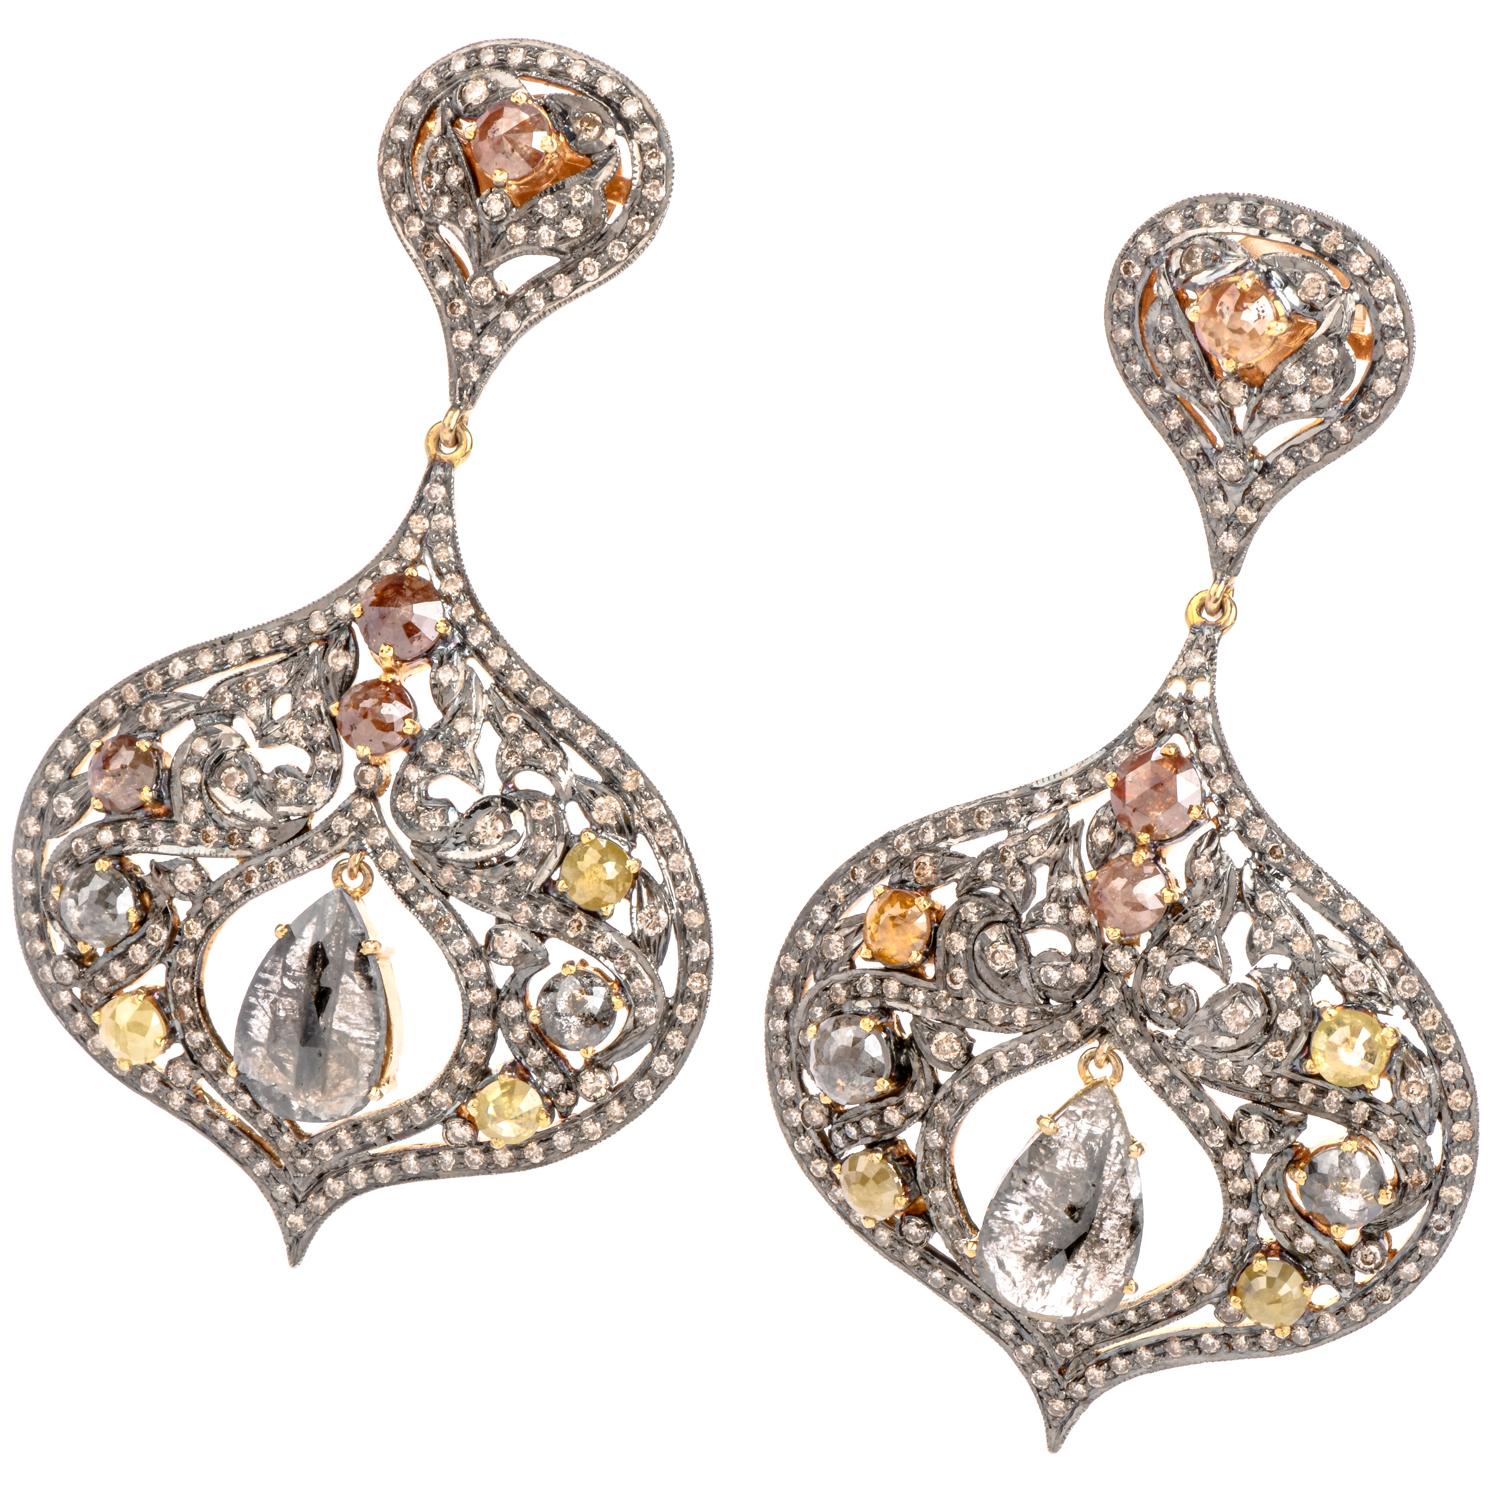 These grand statement dangle drop earrings crafted in silver and 14k gold. it  showcases an elaborate and elegant design that highlights two dangling pear cut diamonds. These fashionable earrings are set with an array of multicolored rose cut